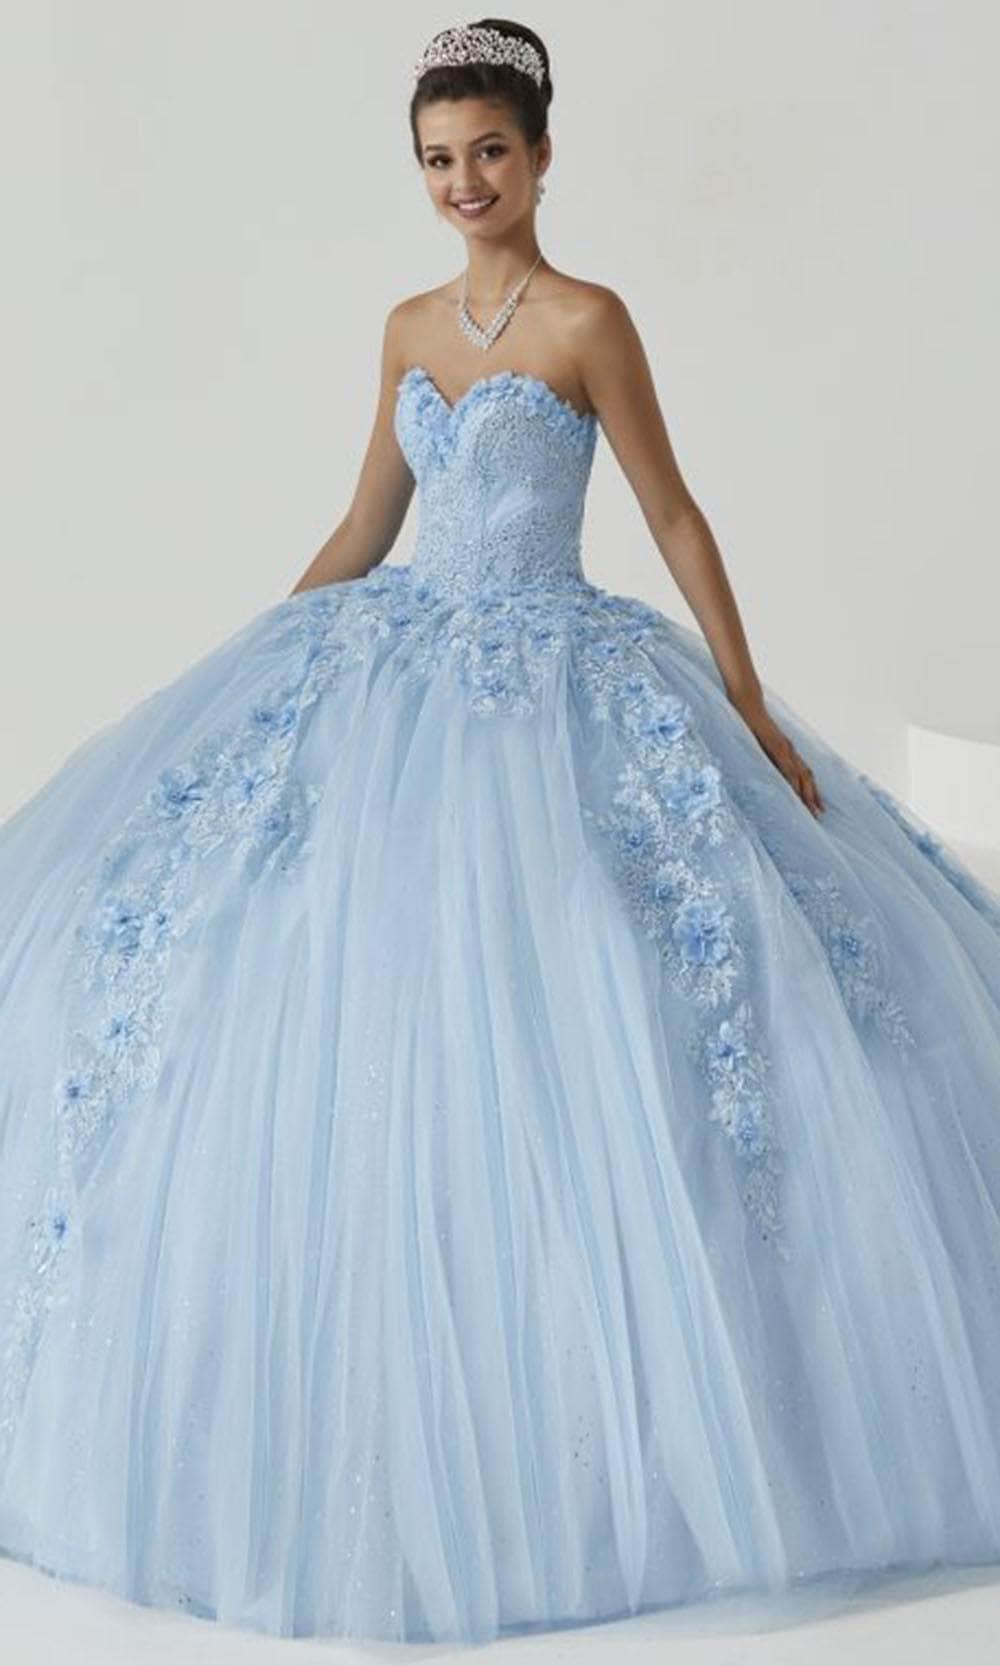 Image of Fiesta Gowns - 56432 Strapless Embellished Ballgown